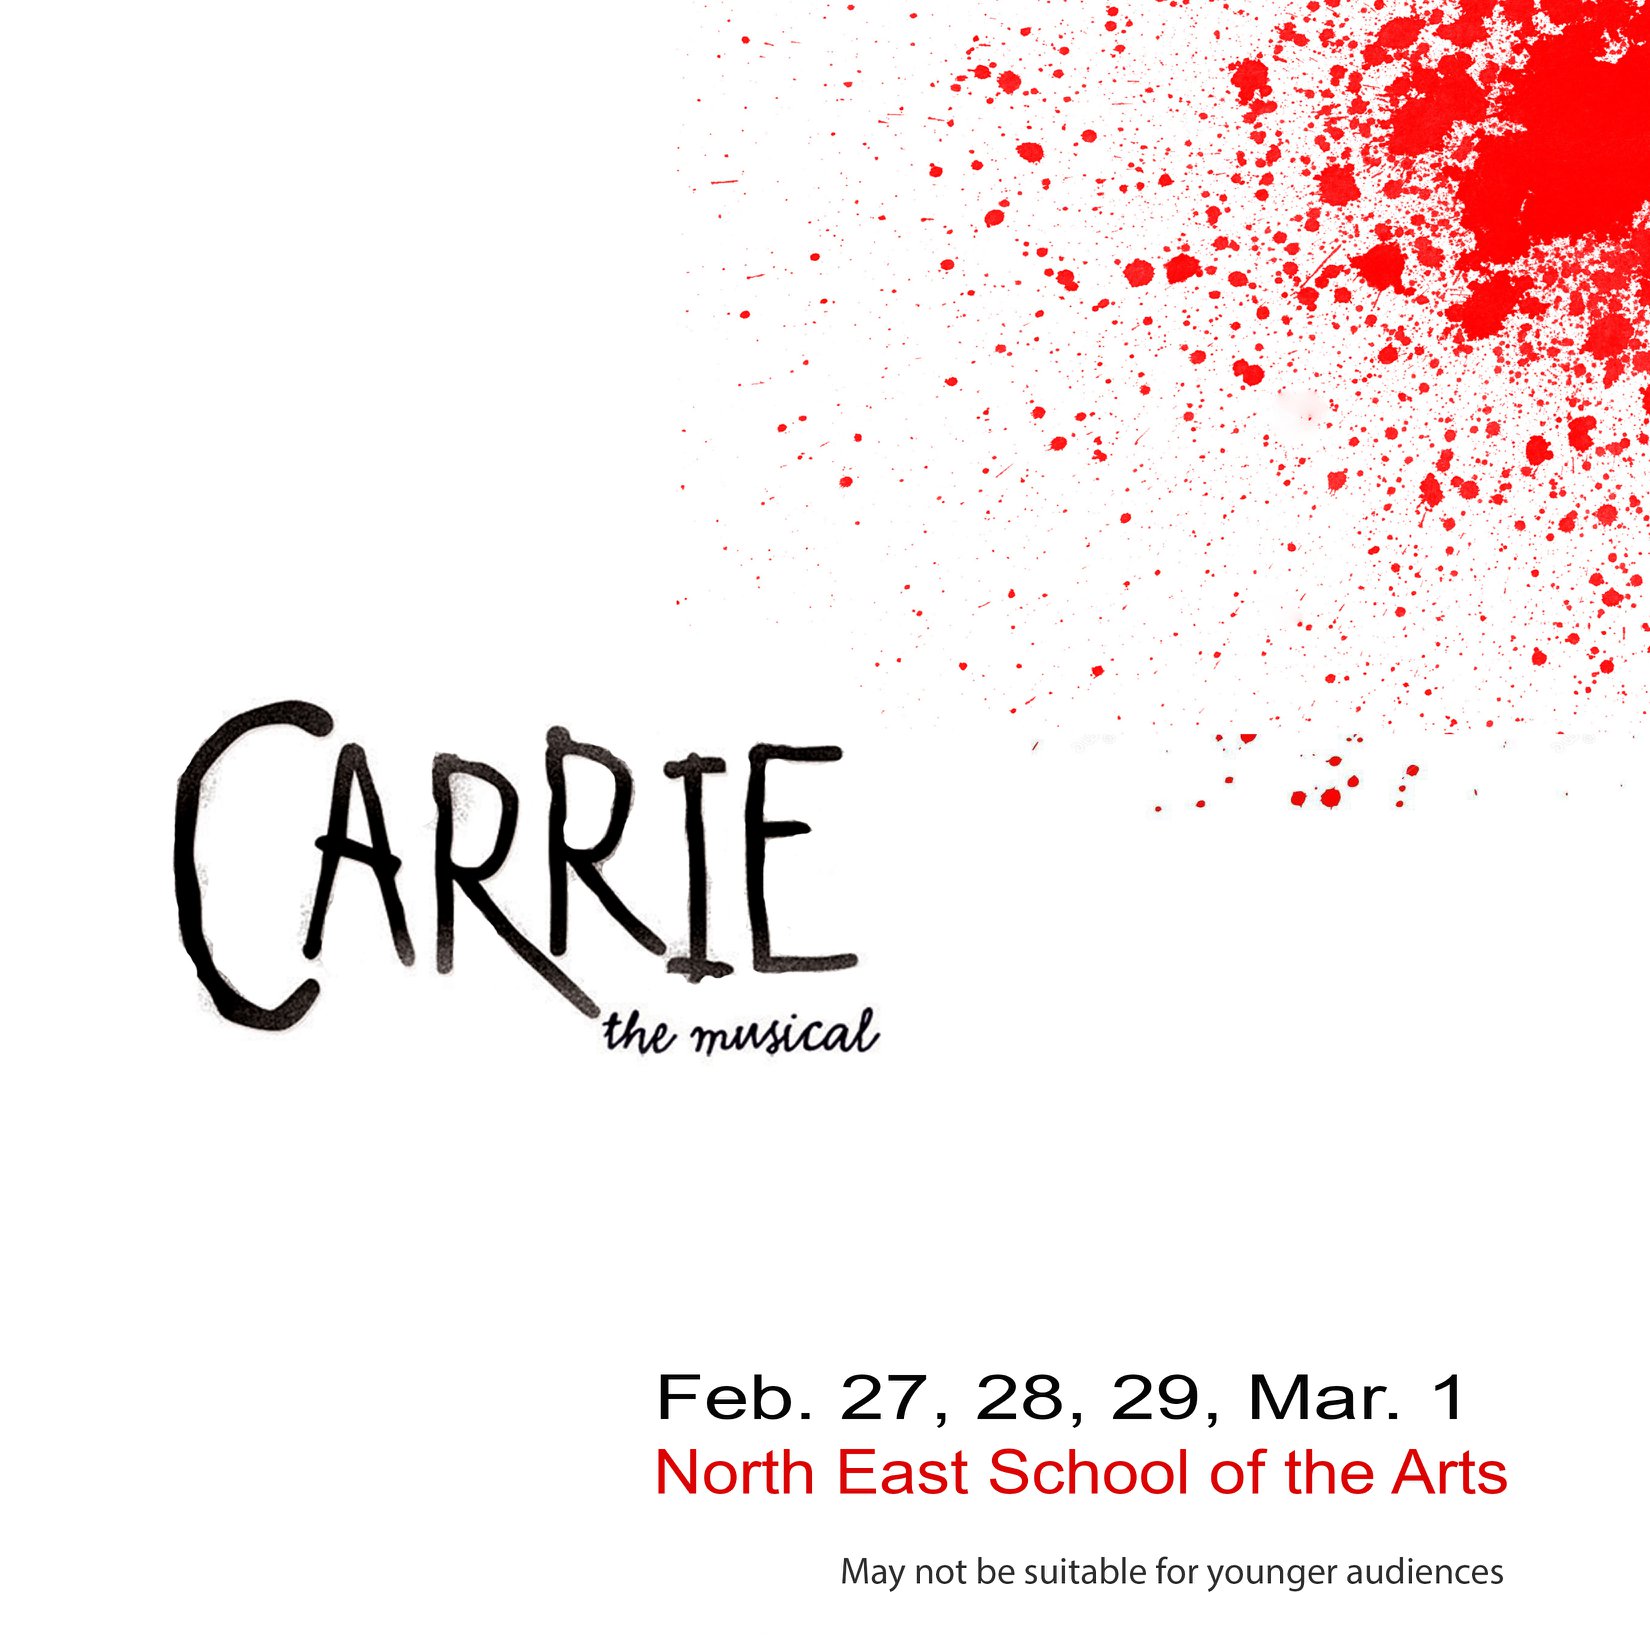 Carrie, the musical by NESA Northeast School of the Arts